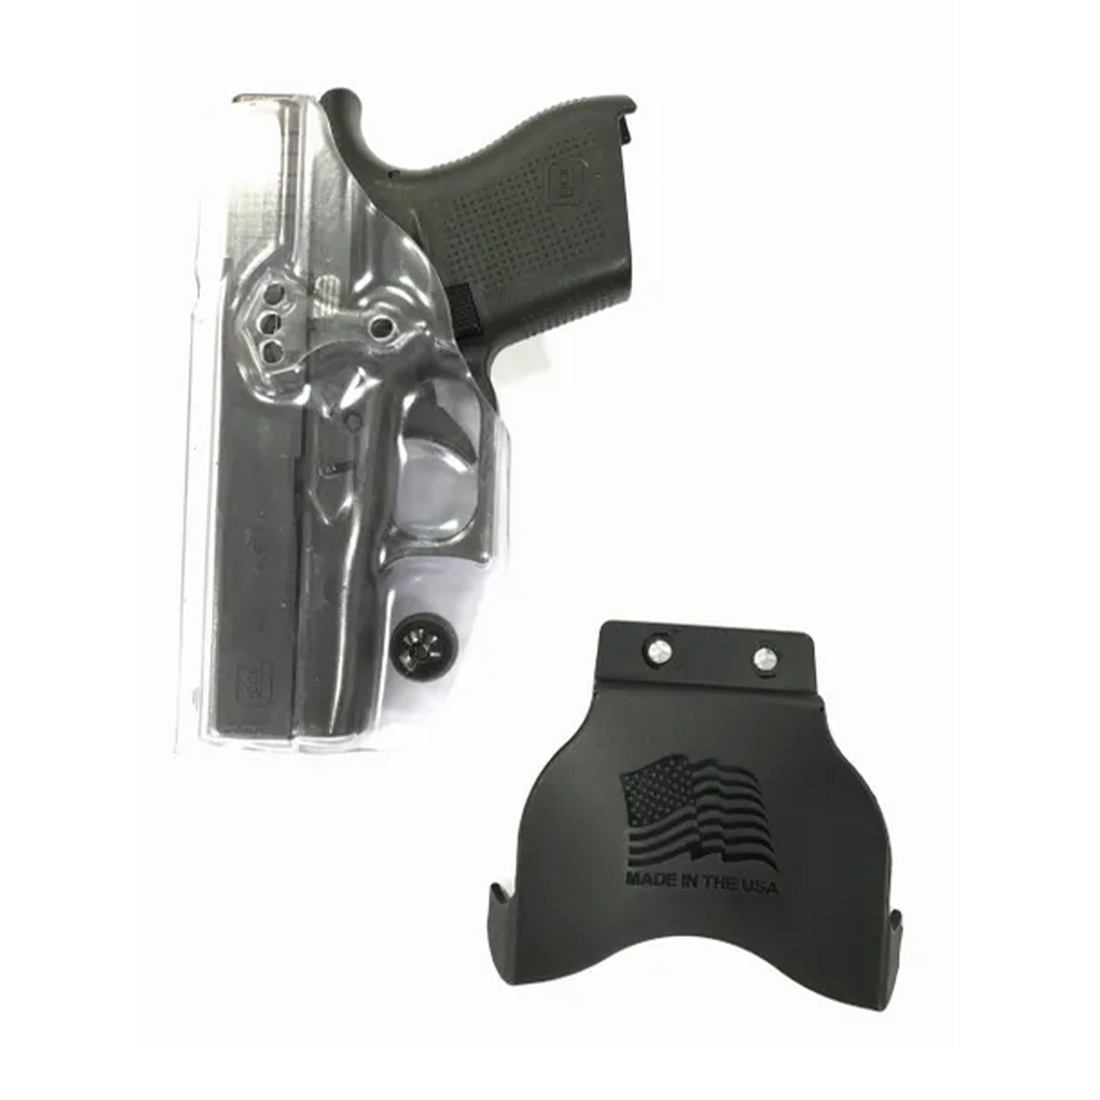 Chiappa OWB Paddle Holsters